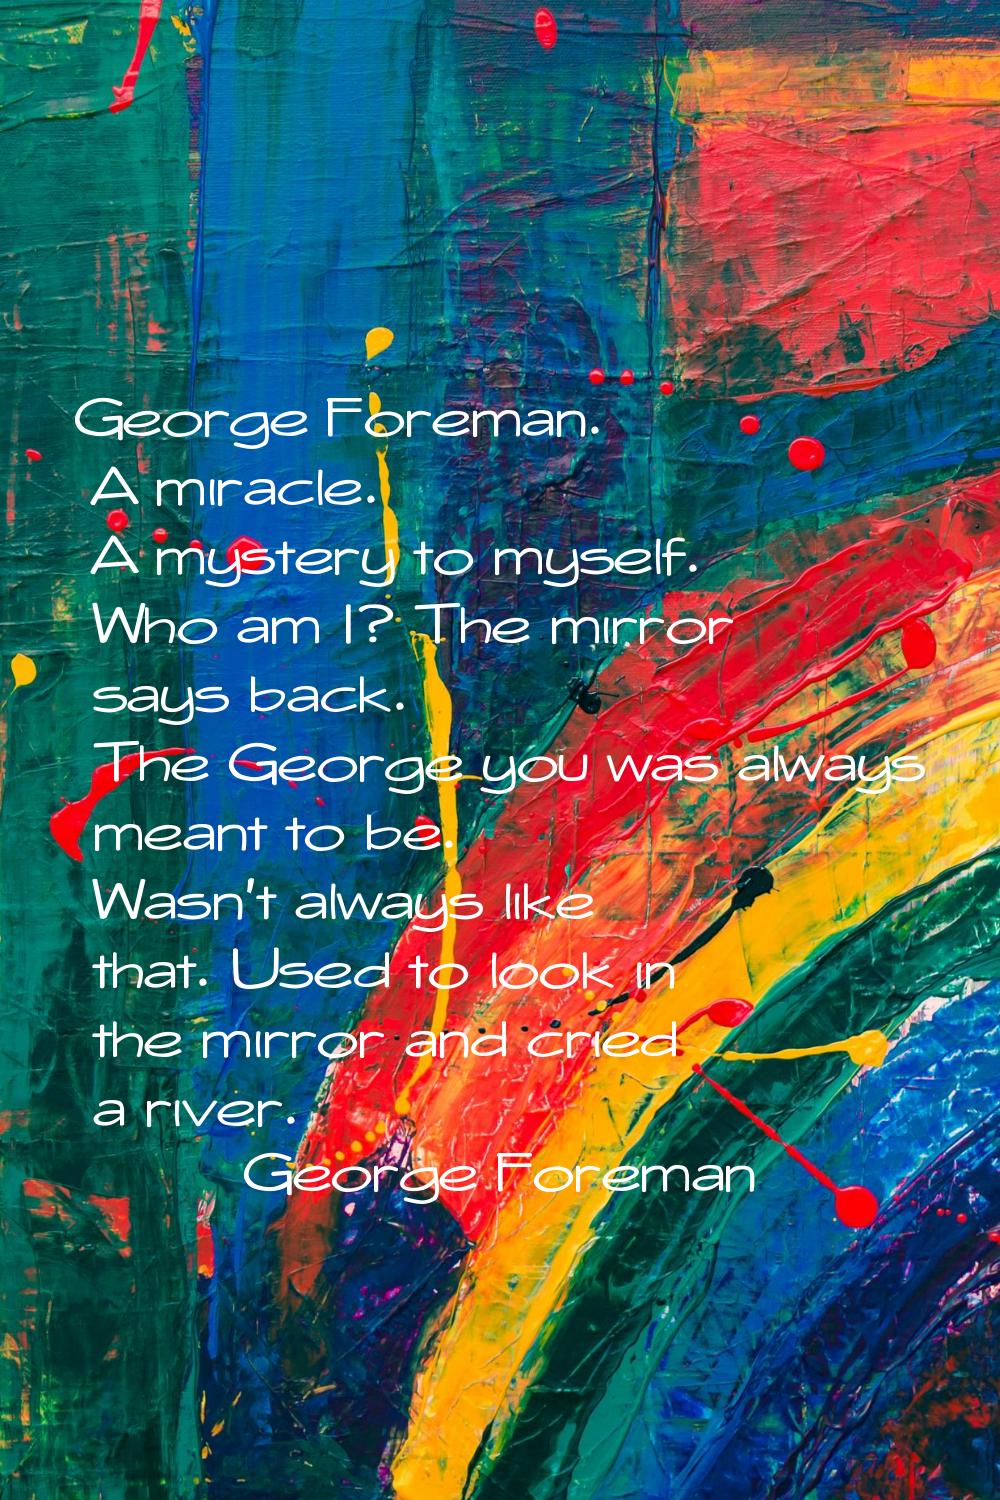 George Foreman. A miracle. A mystery to myself. Who am I? The mirror says back. The George you was 